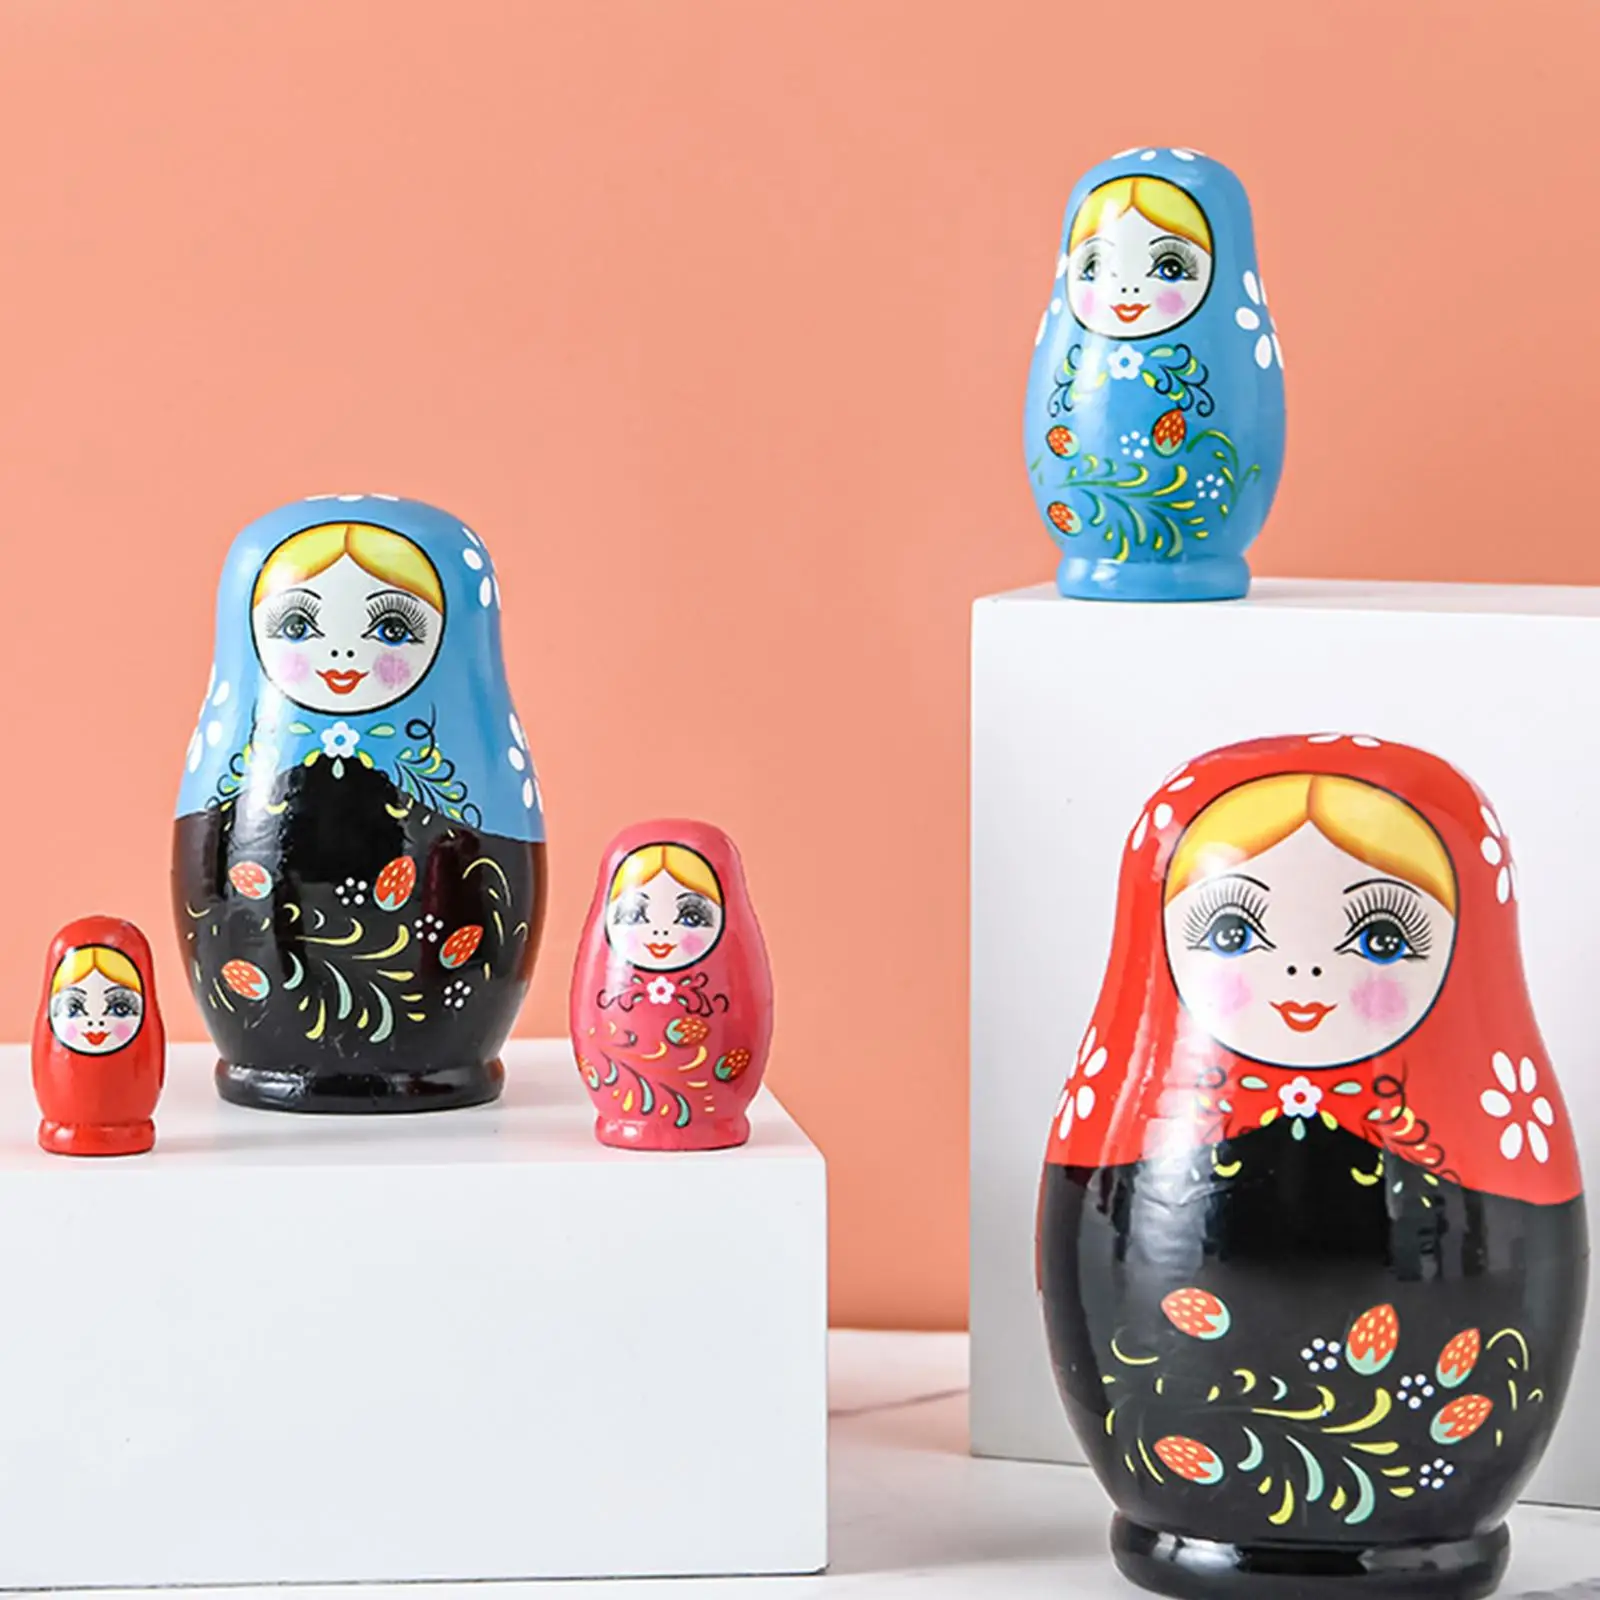 5Pcs Hand Painted Russian Matryoshka Nesting Dolls for Xmas Gifts Party Prop